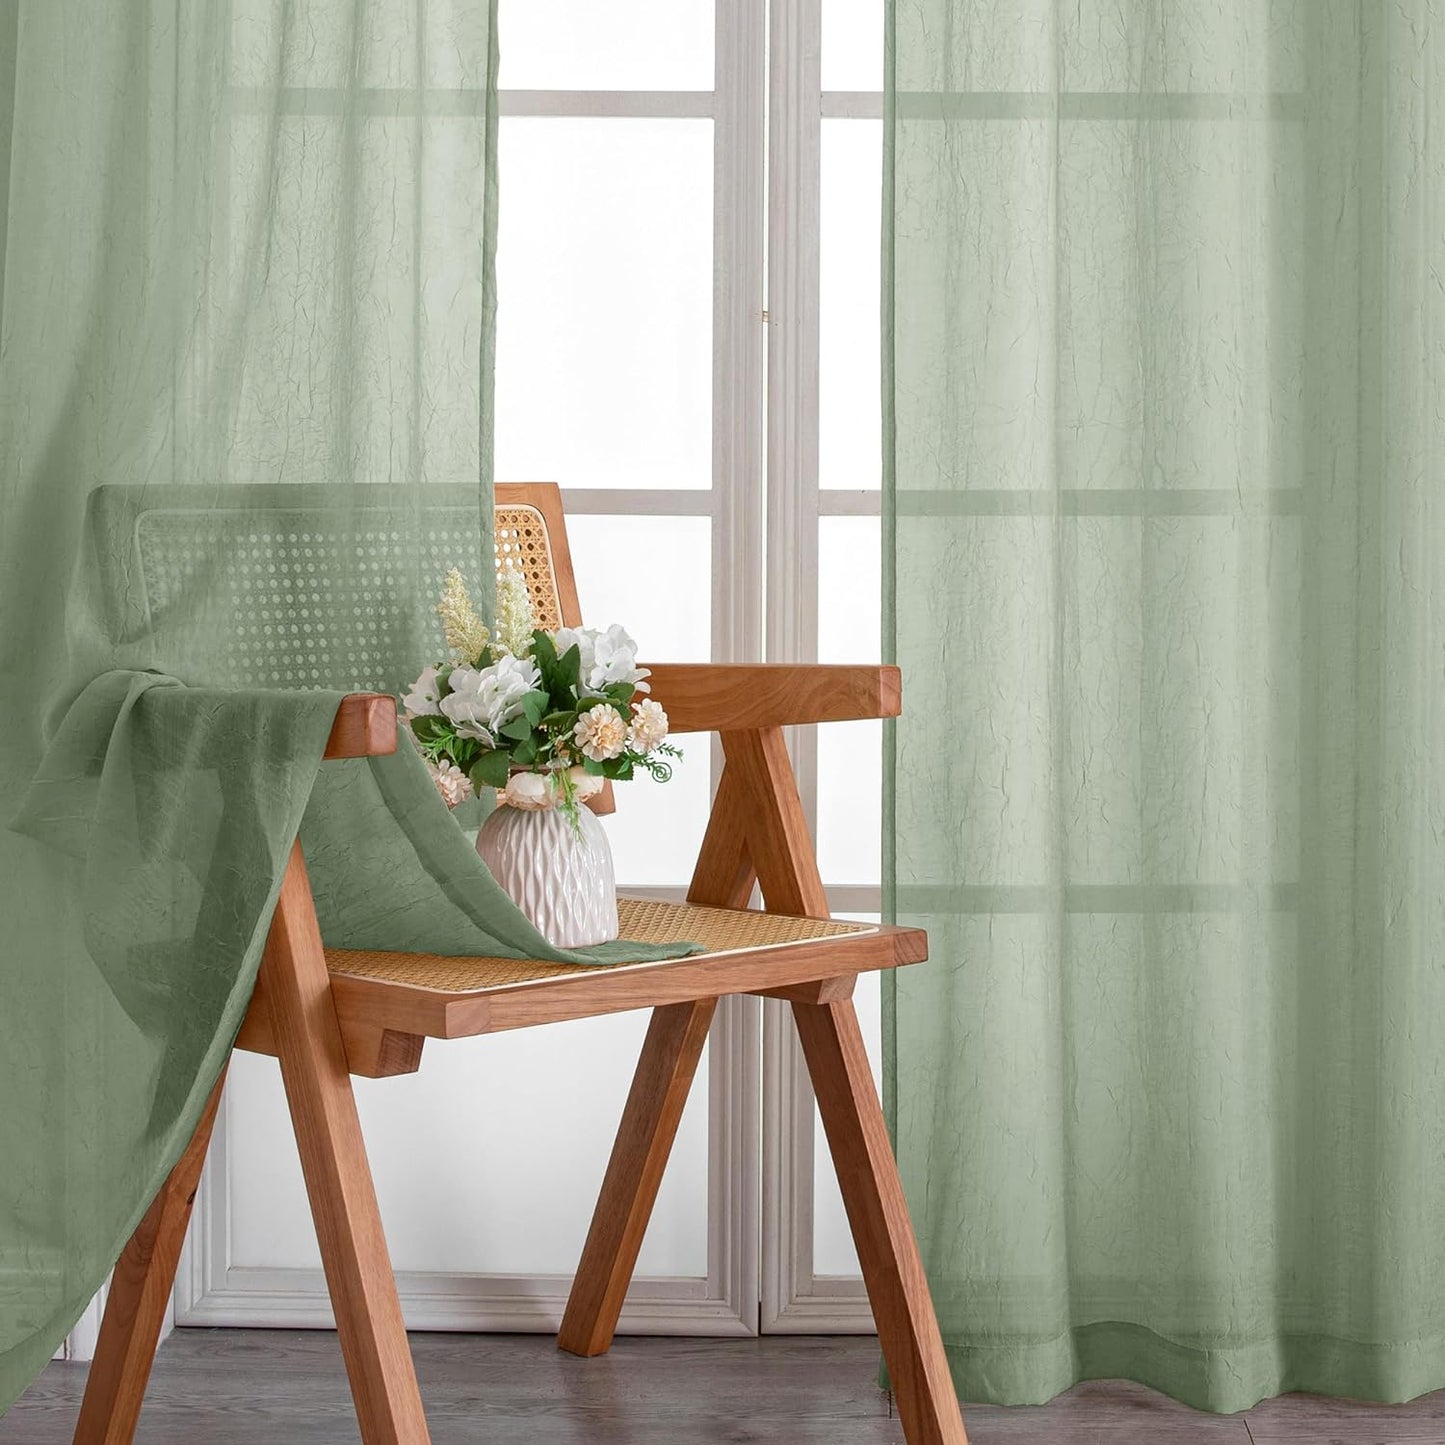 Chyhomenyc Crushed White Sheer Valances for Window 14 Inch Length 2 PCS, Crinkle Voile Short Kitchen Curtains with Dual Rod Pockets，Gauzy Bedroom Curtain Valance，Each 42Wx14L Inches  Chyhomenyc Sage Green 42 W X 72 L 